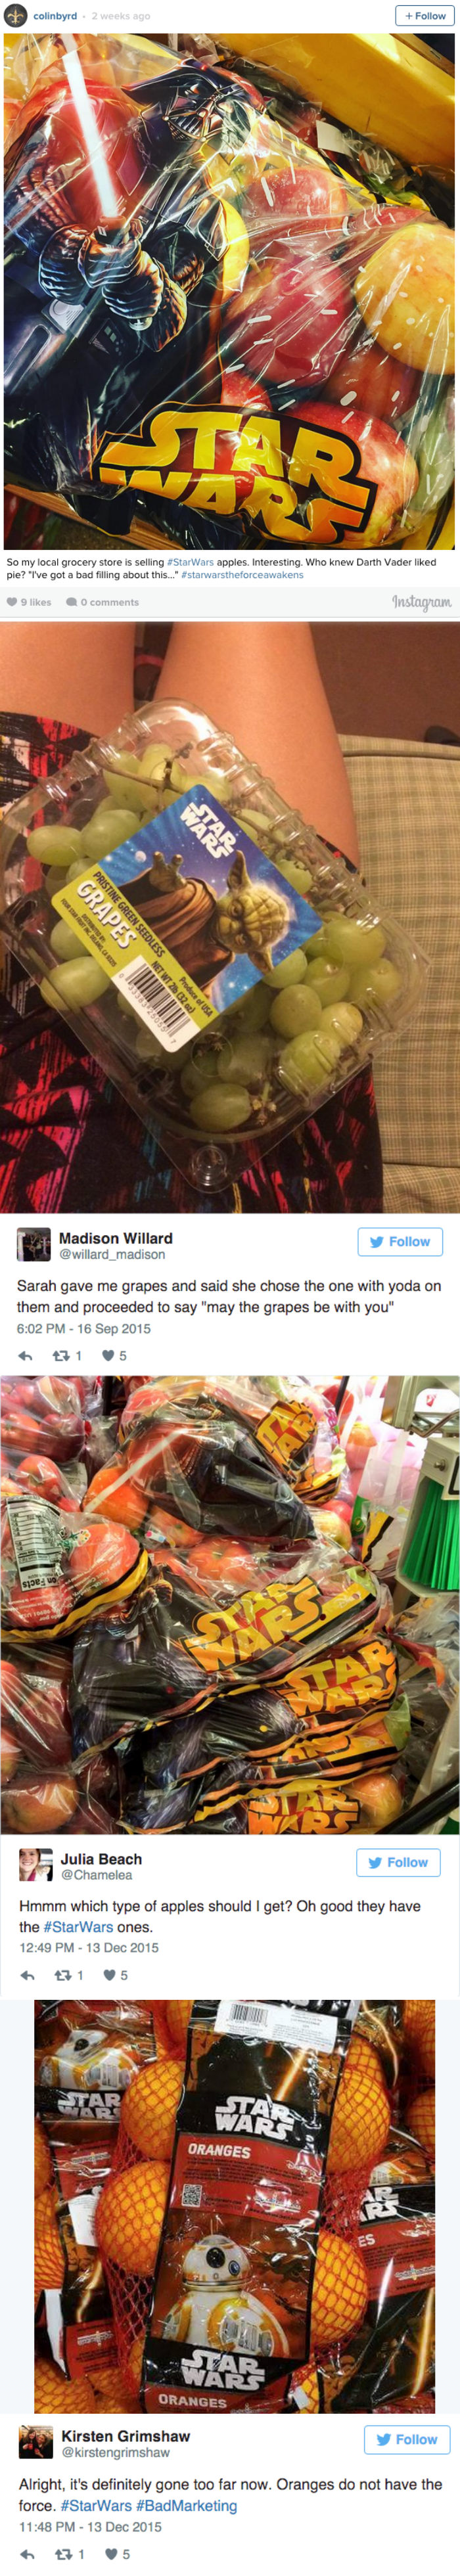 funny fail images twitter users rebel against star wars branded fruits